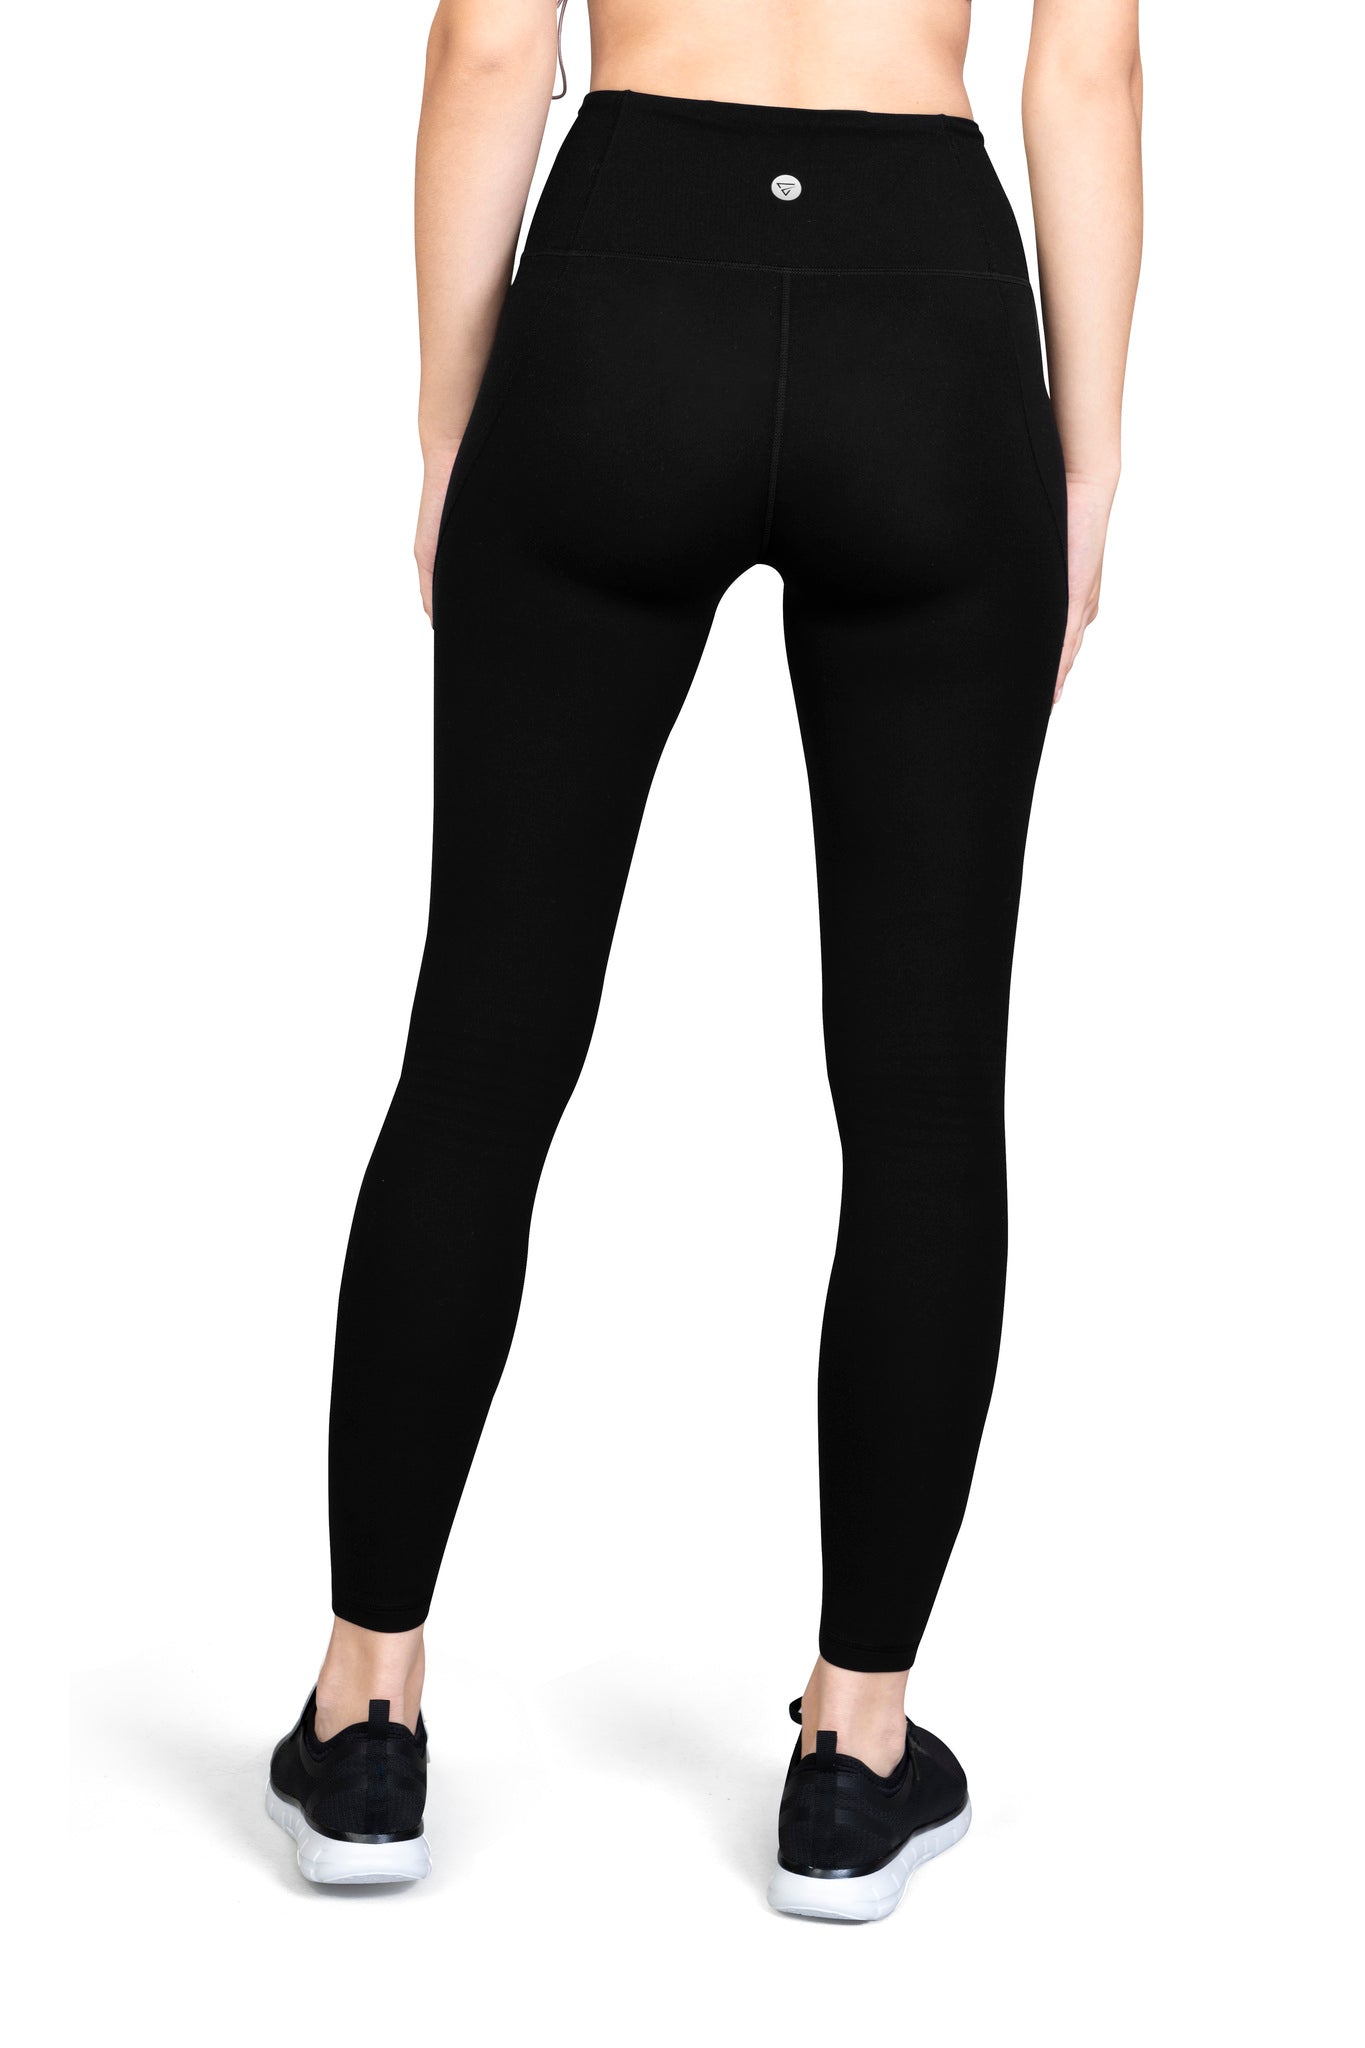 Four way stretch, sweat wicking leggings black for gym, workouts, gym and leisure